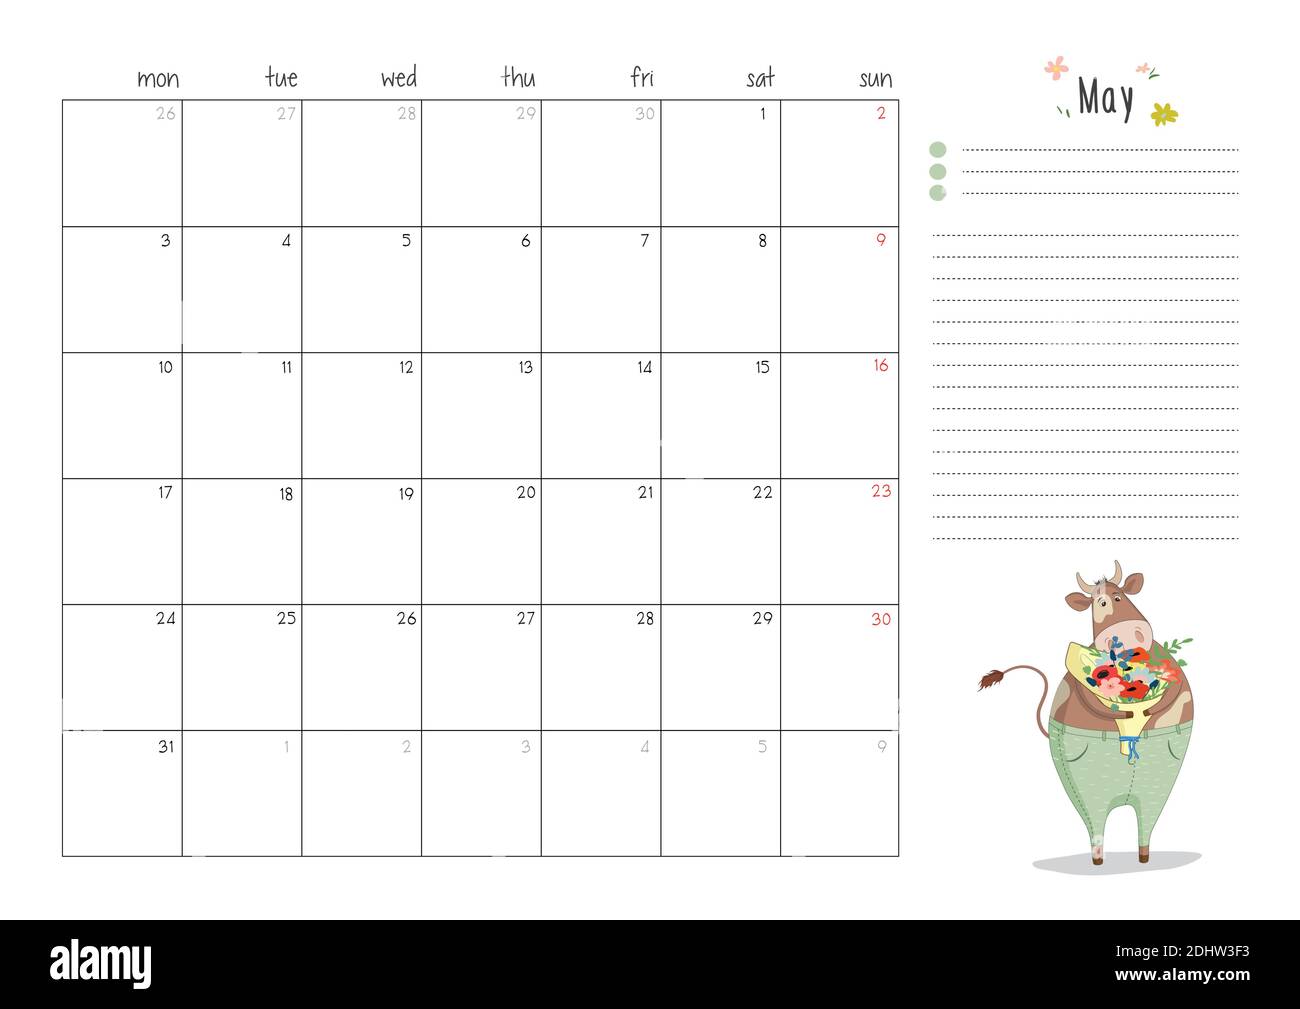 Featured image of post May 2021 Calendar Printable A4 : For personal use only, not to be copied, distributed, altered or sold.